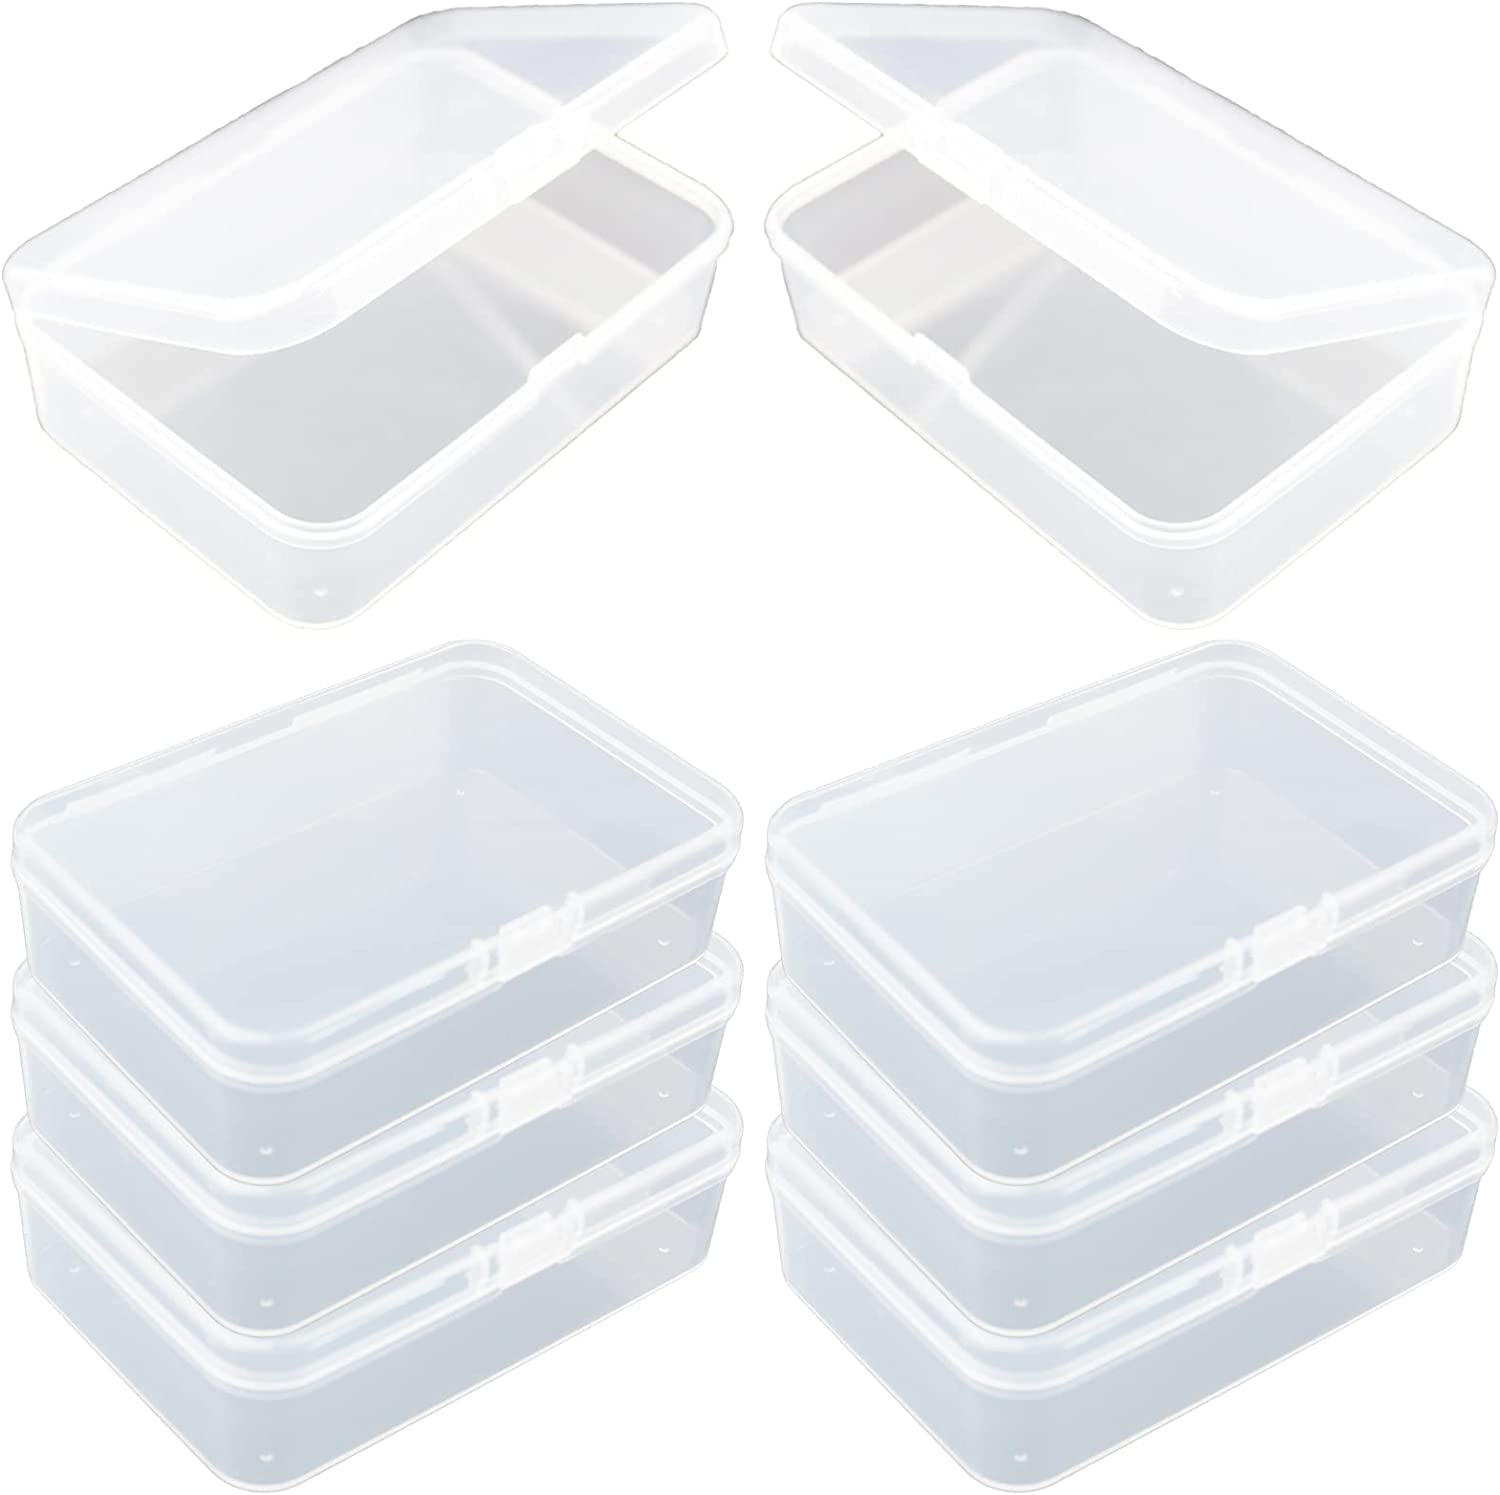 30 Pcs Small Plastic Storage Containers with Hinged Lids - Clear Bead